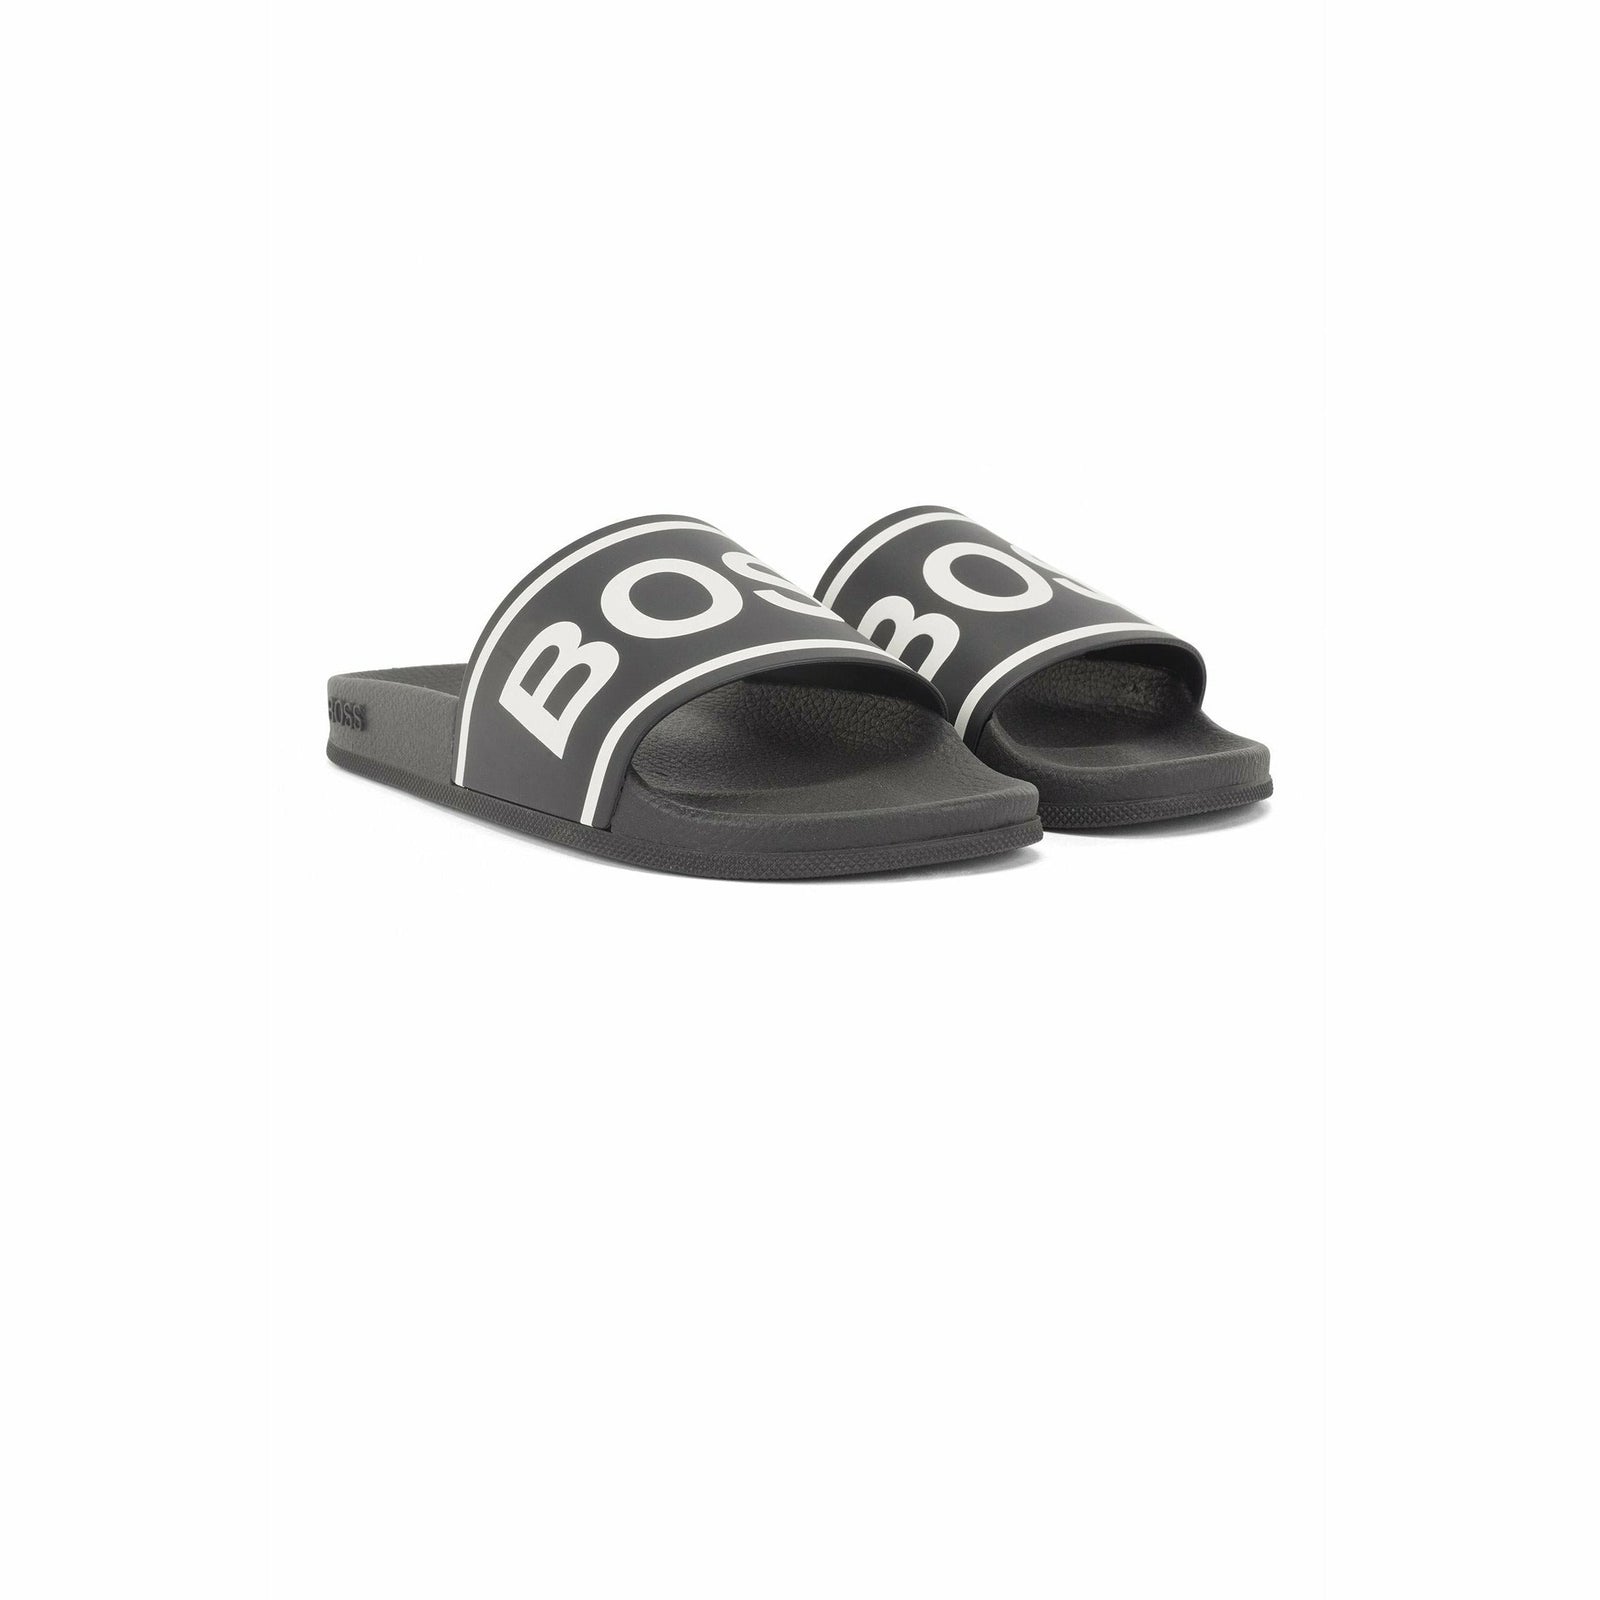 ITALIAN-MADE SLIDES WITH STRIPES AND LOGO - Yooto